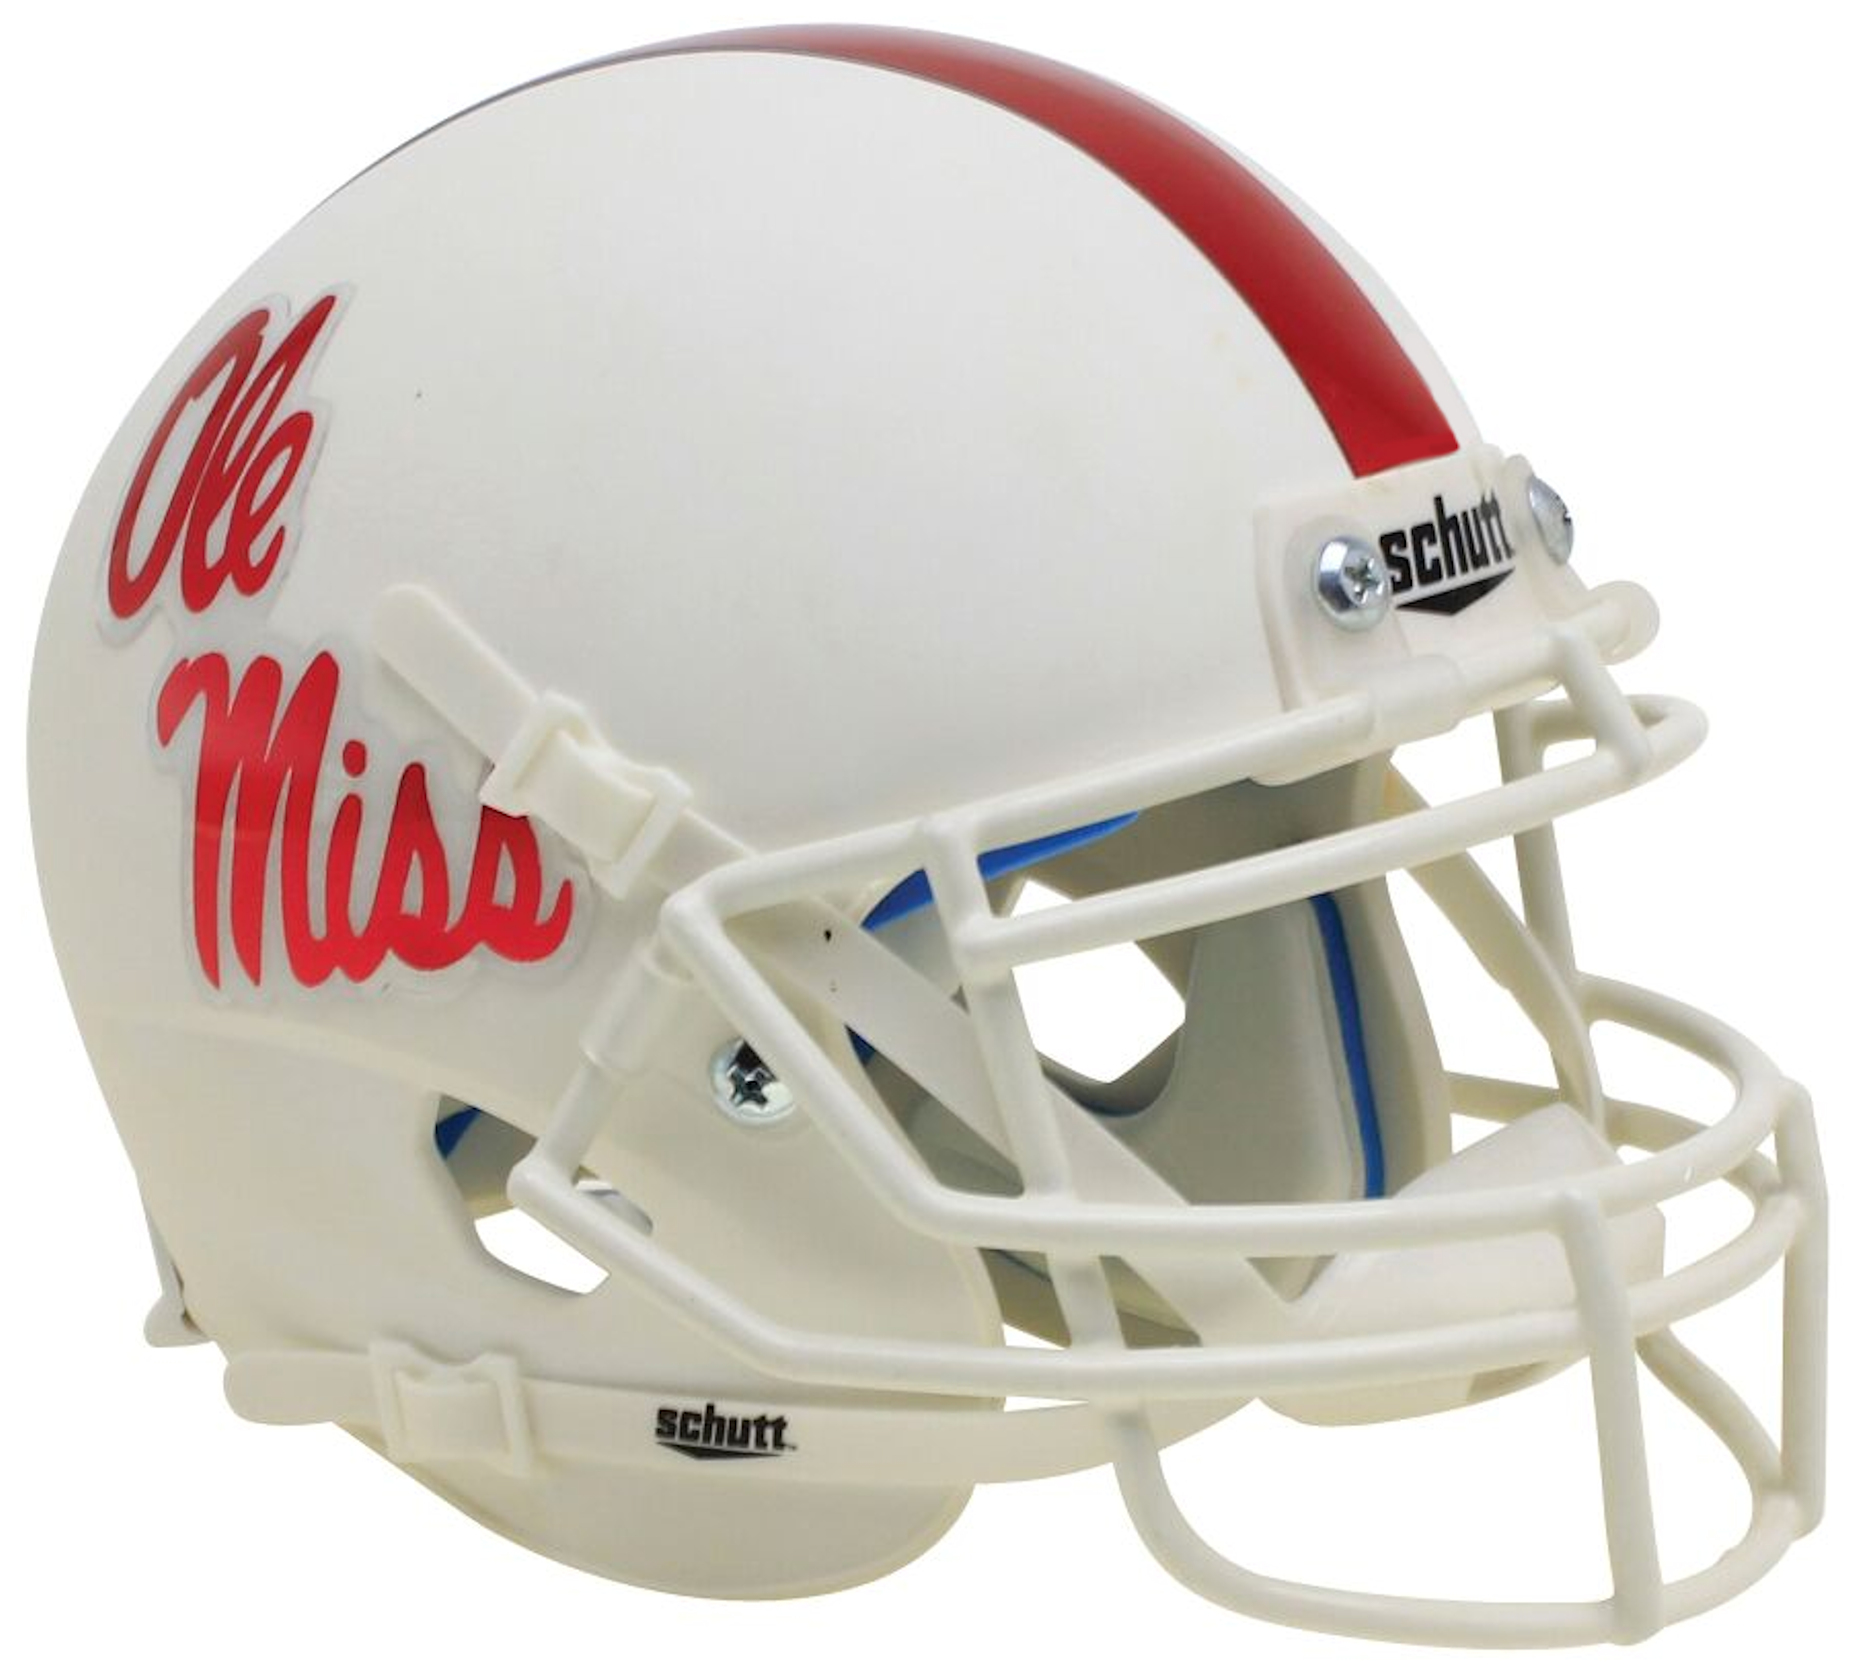 Mississippi (Ole Miss) Rebels Mini XP Authentic Helmet Schutt <B>White With Red Decal</B>